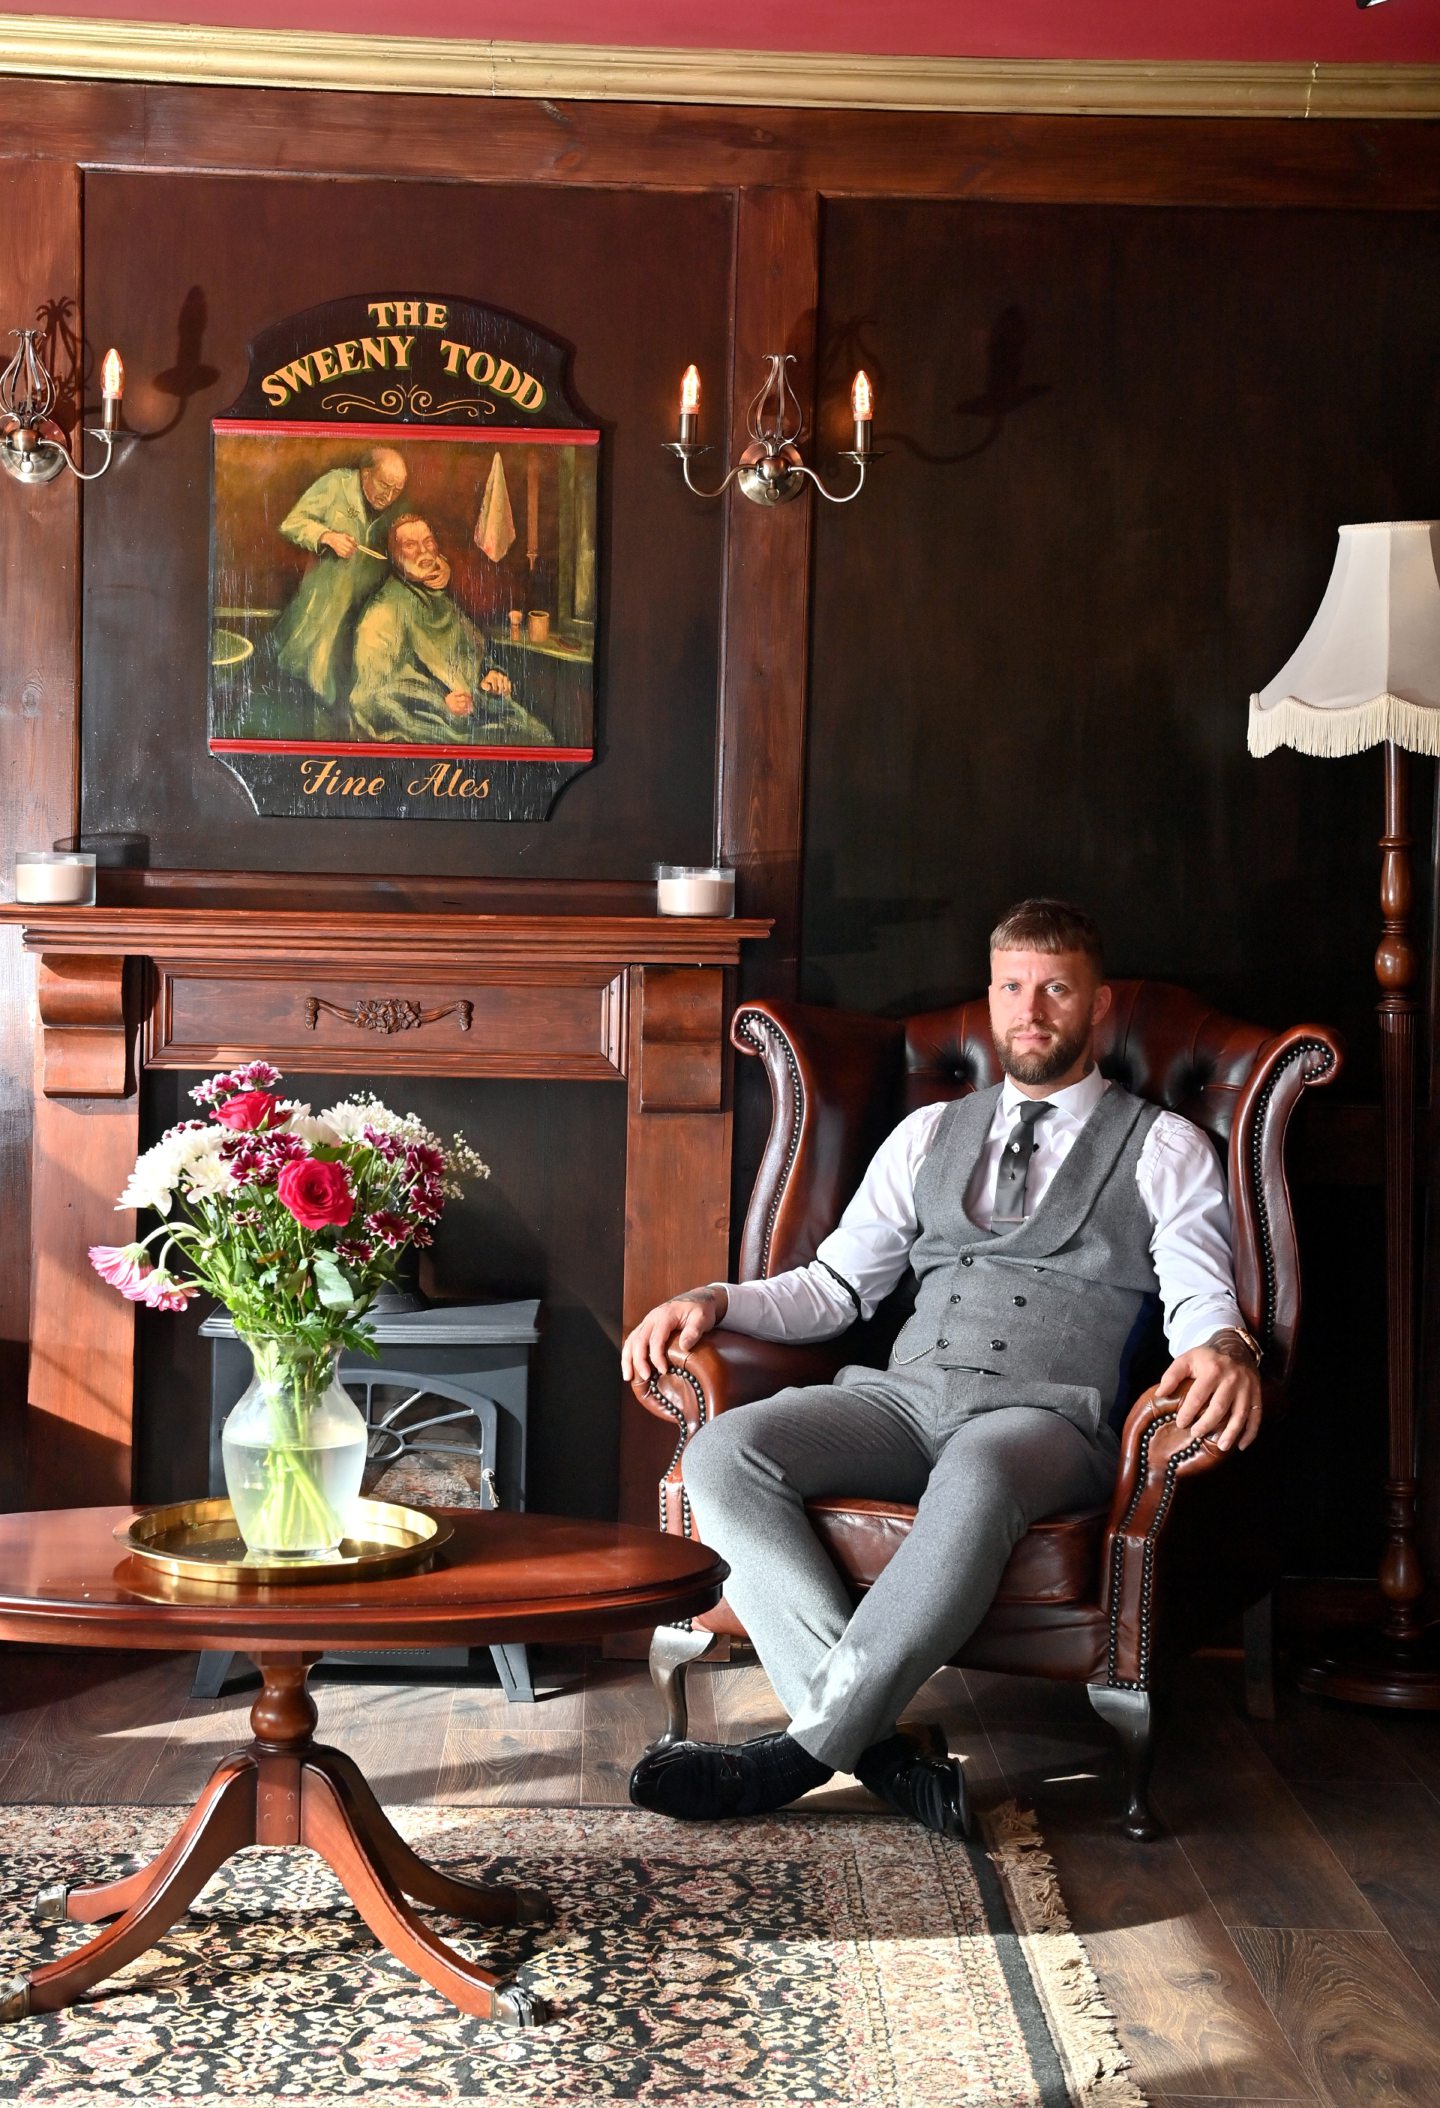 The barber wants to bring a touch of class to Union Street. Image: Kami Thomson/DC Thomson